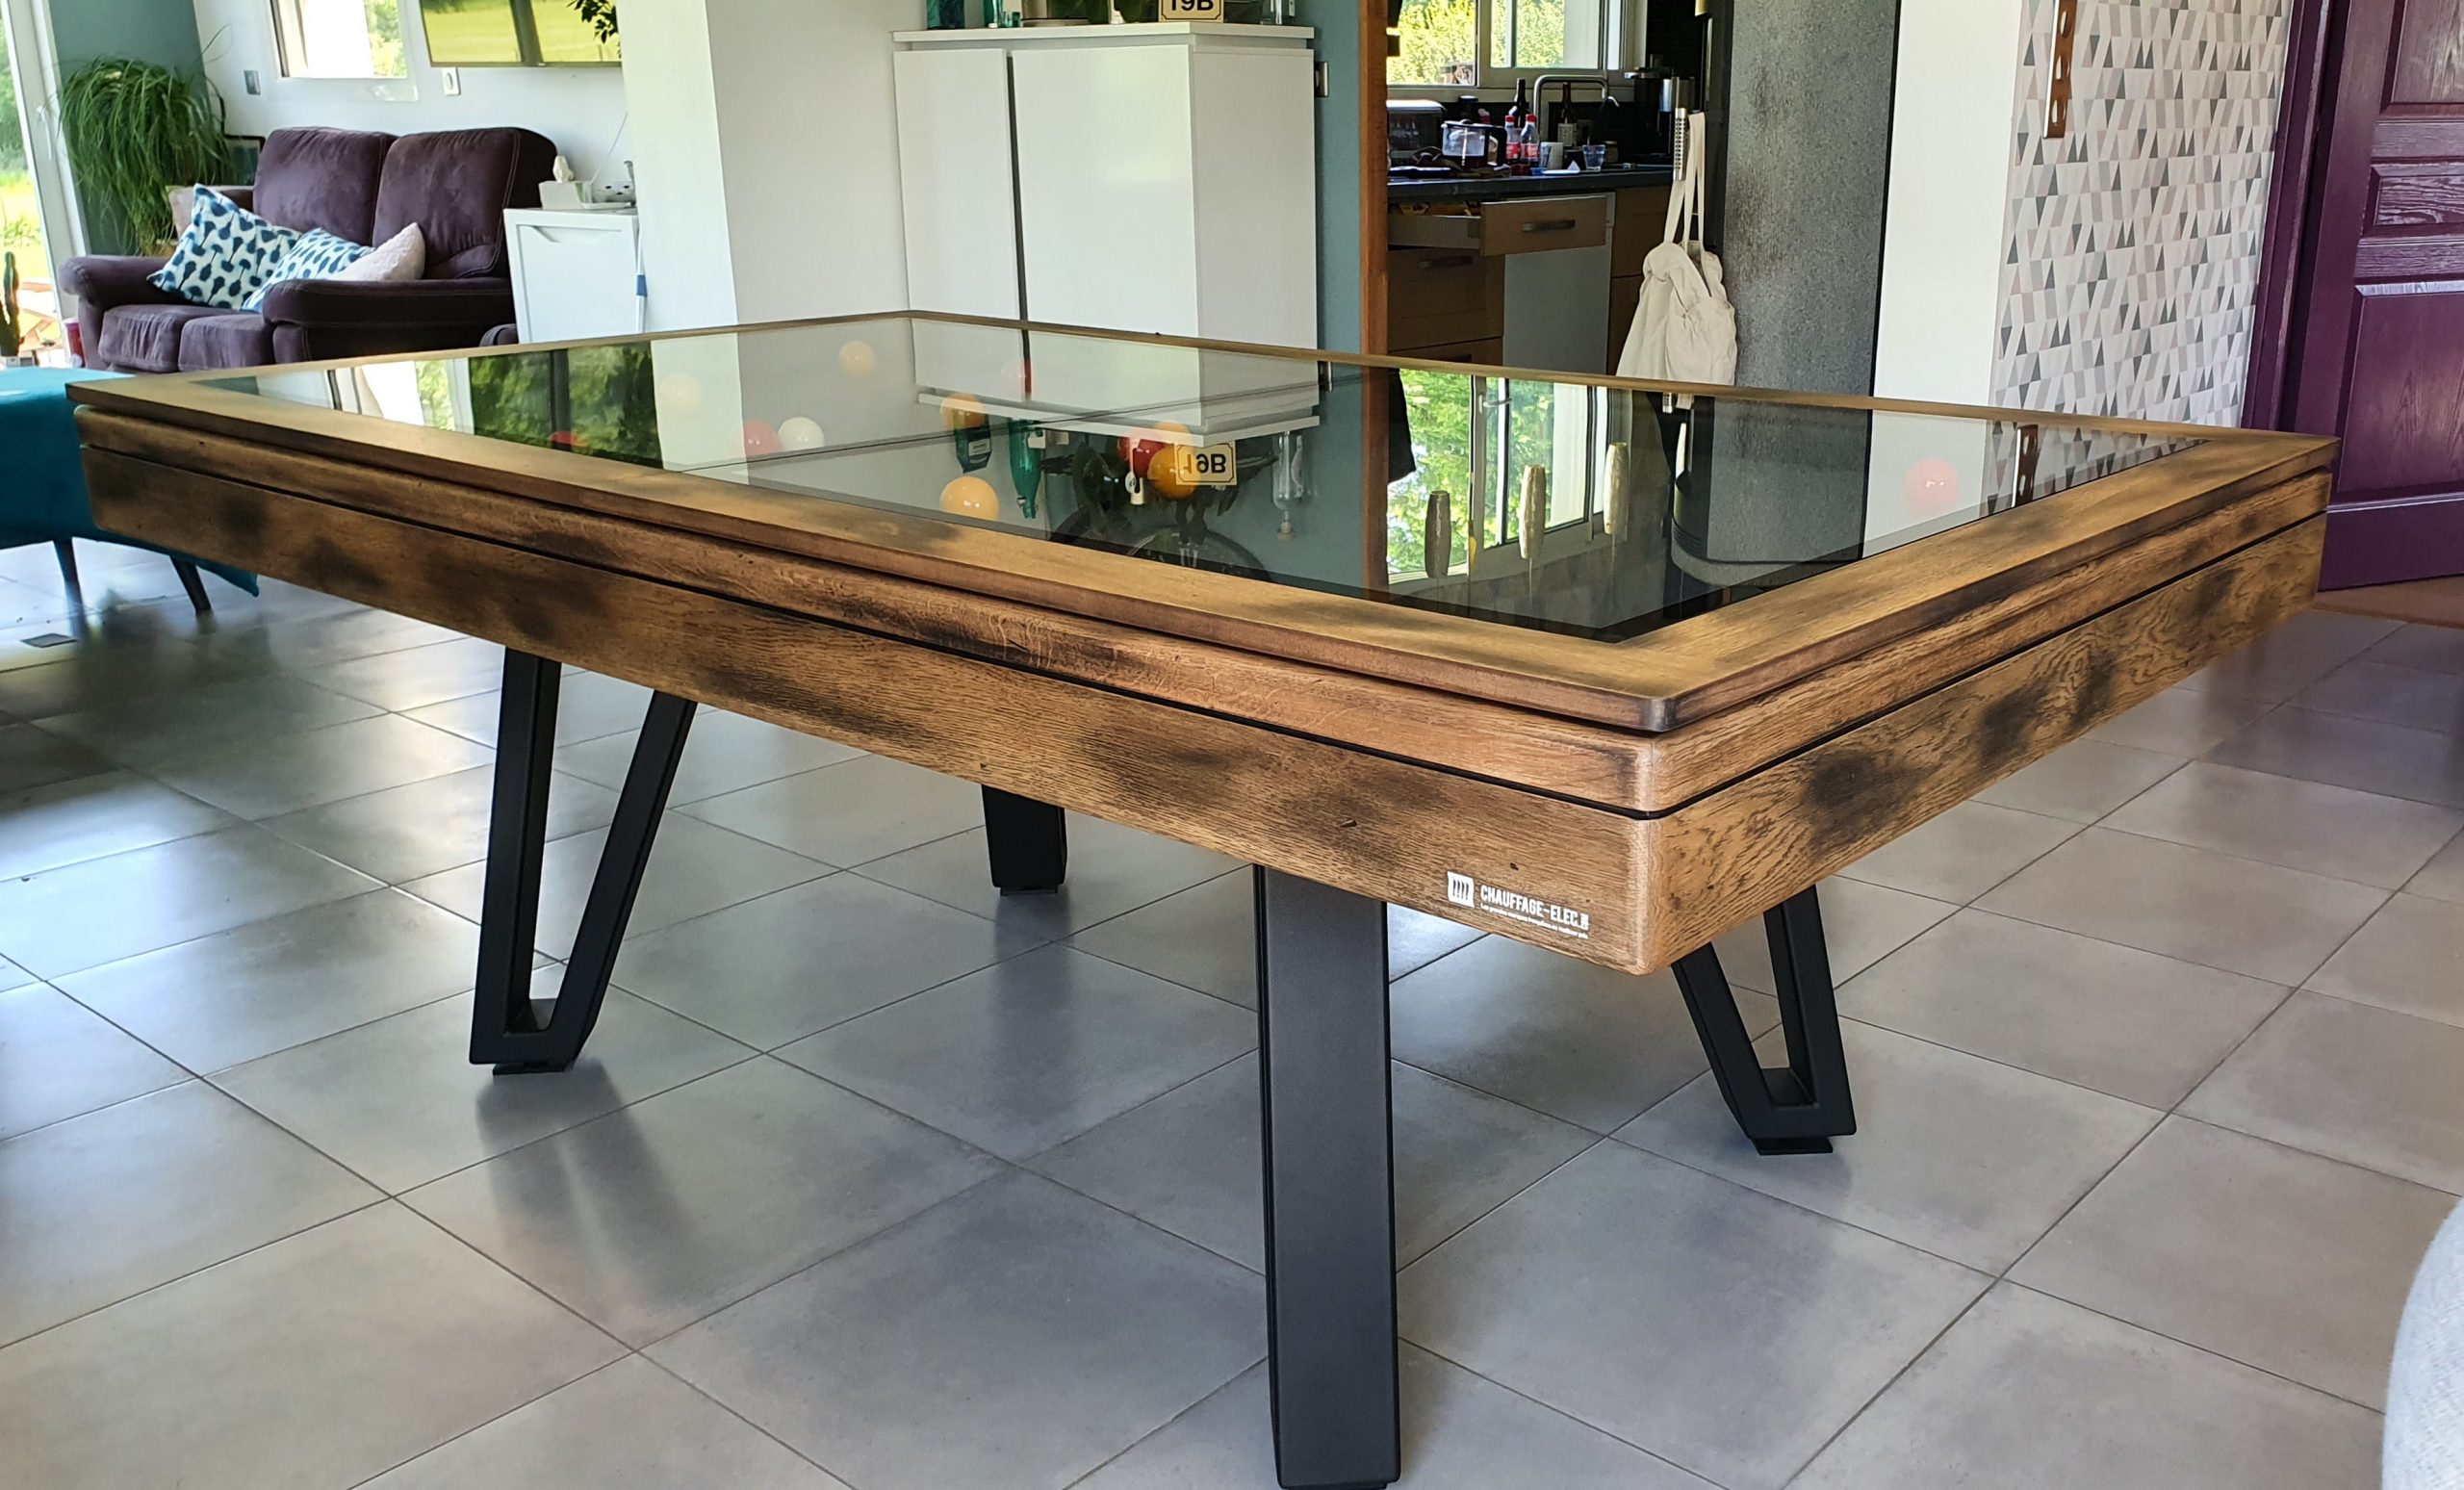 DESIGN Glass pool table By Billards Toulet